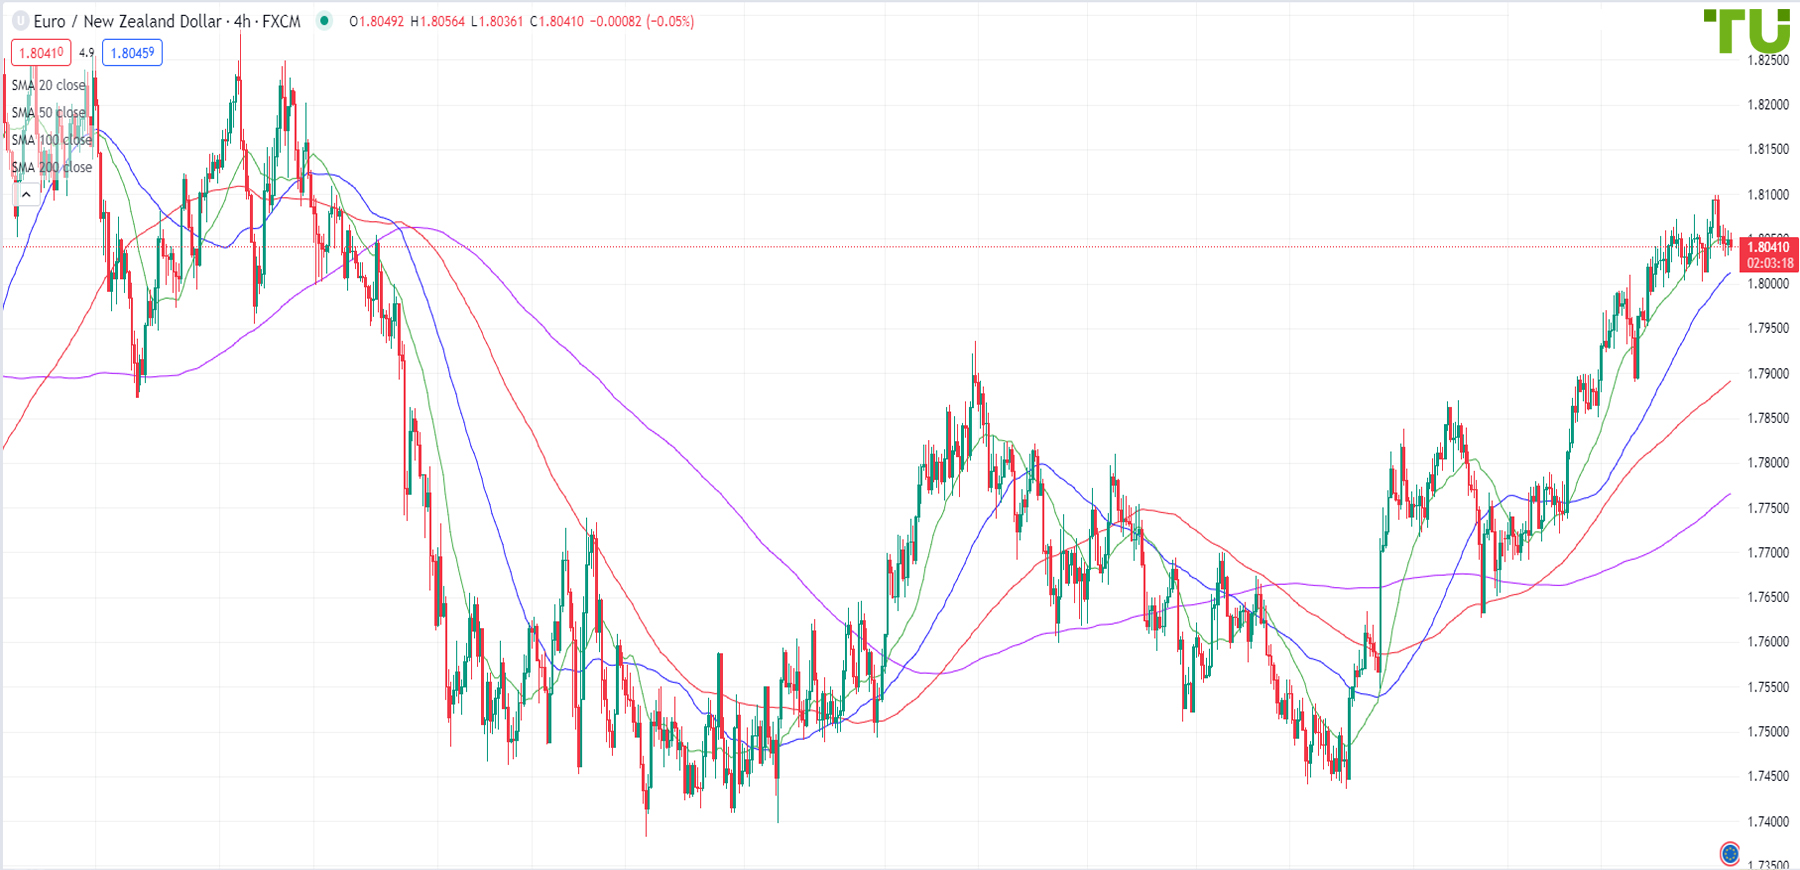 Euro/Kiwi retreats from the current high